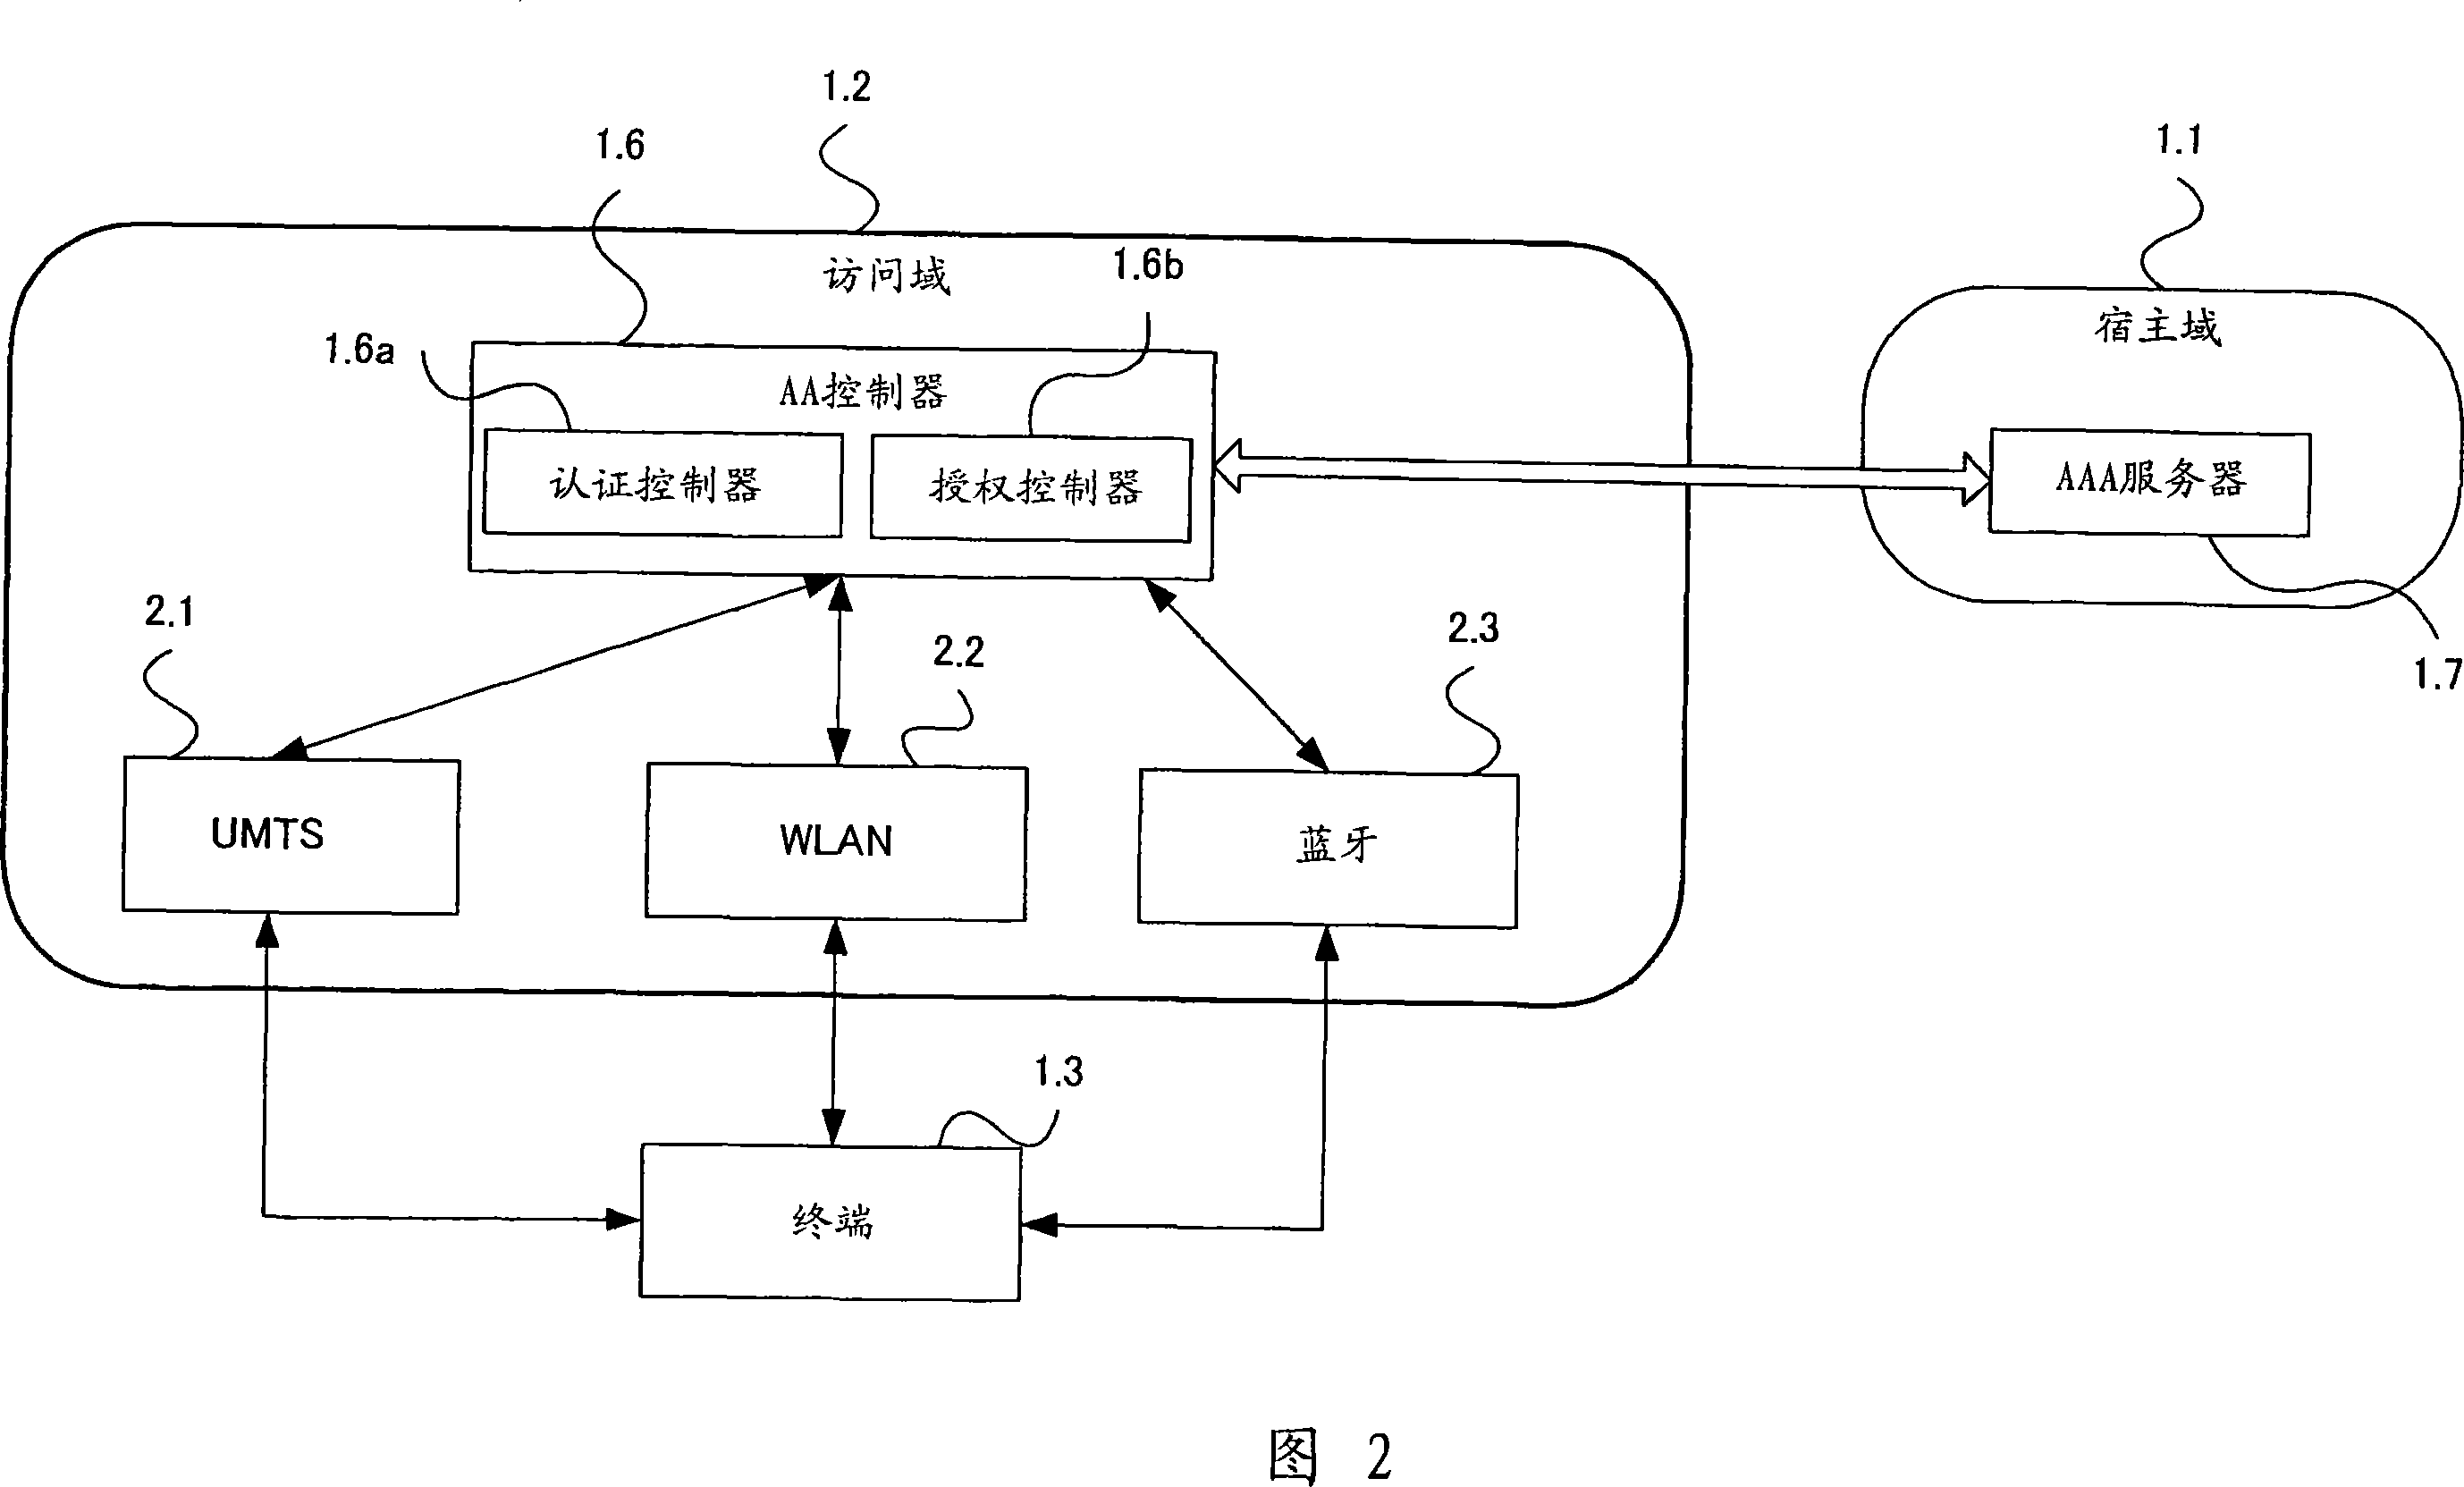 System and method for managing user authentication and service authorization to achieve single-sign-on to access multiple network interfaces